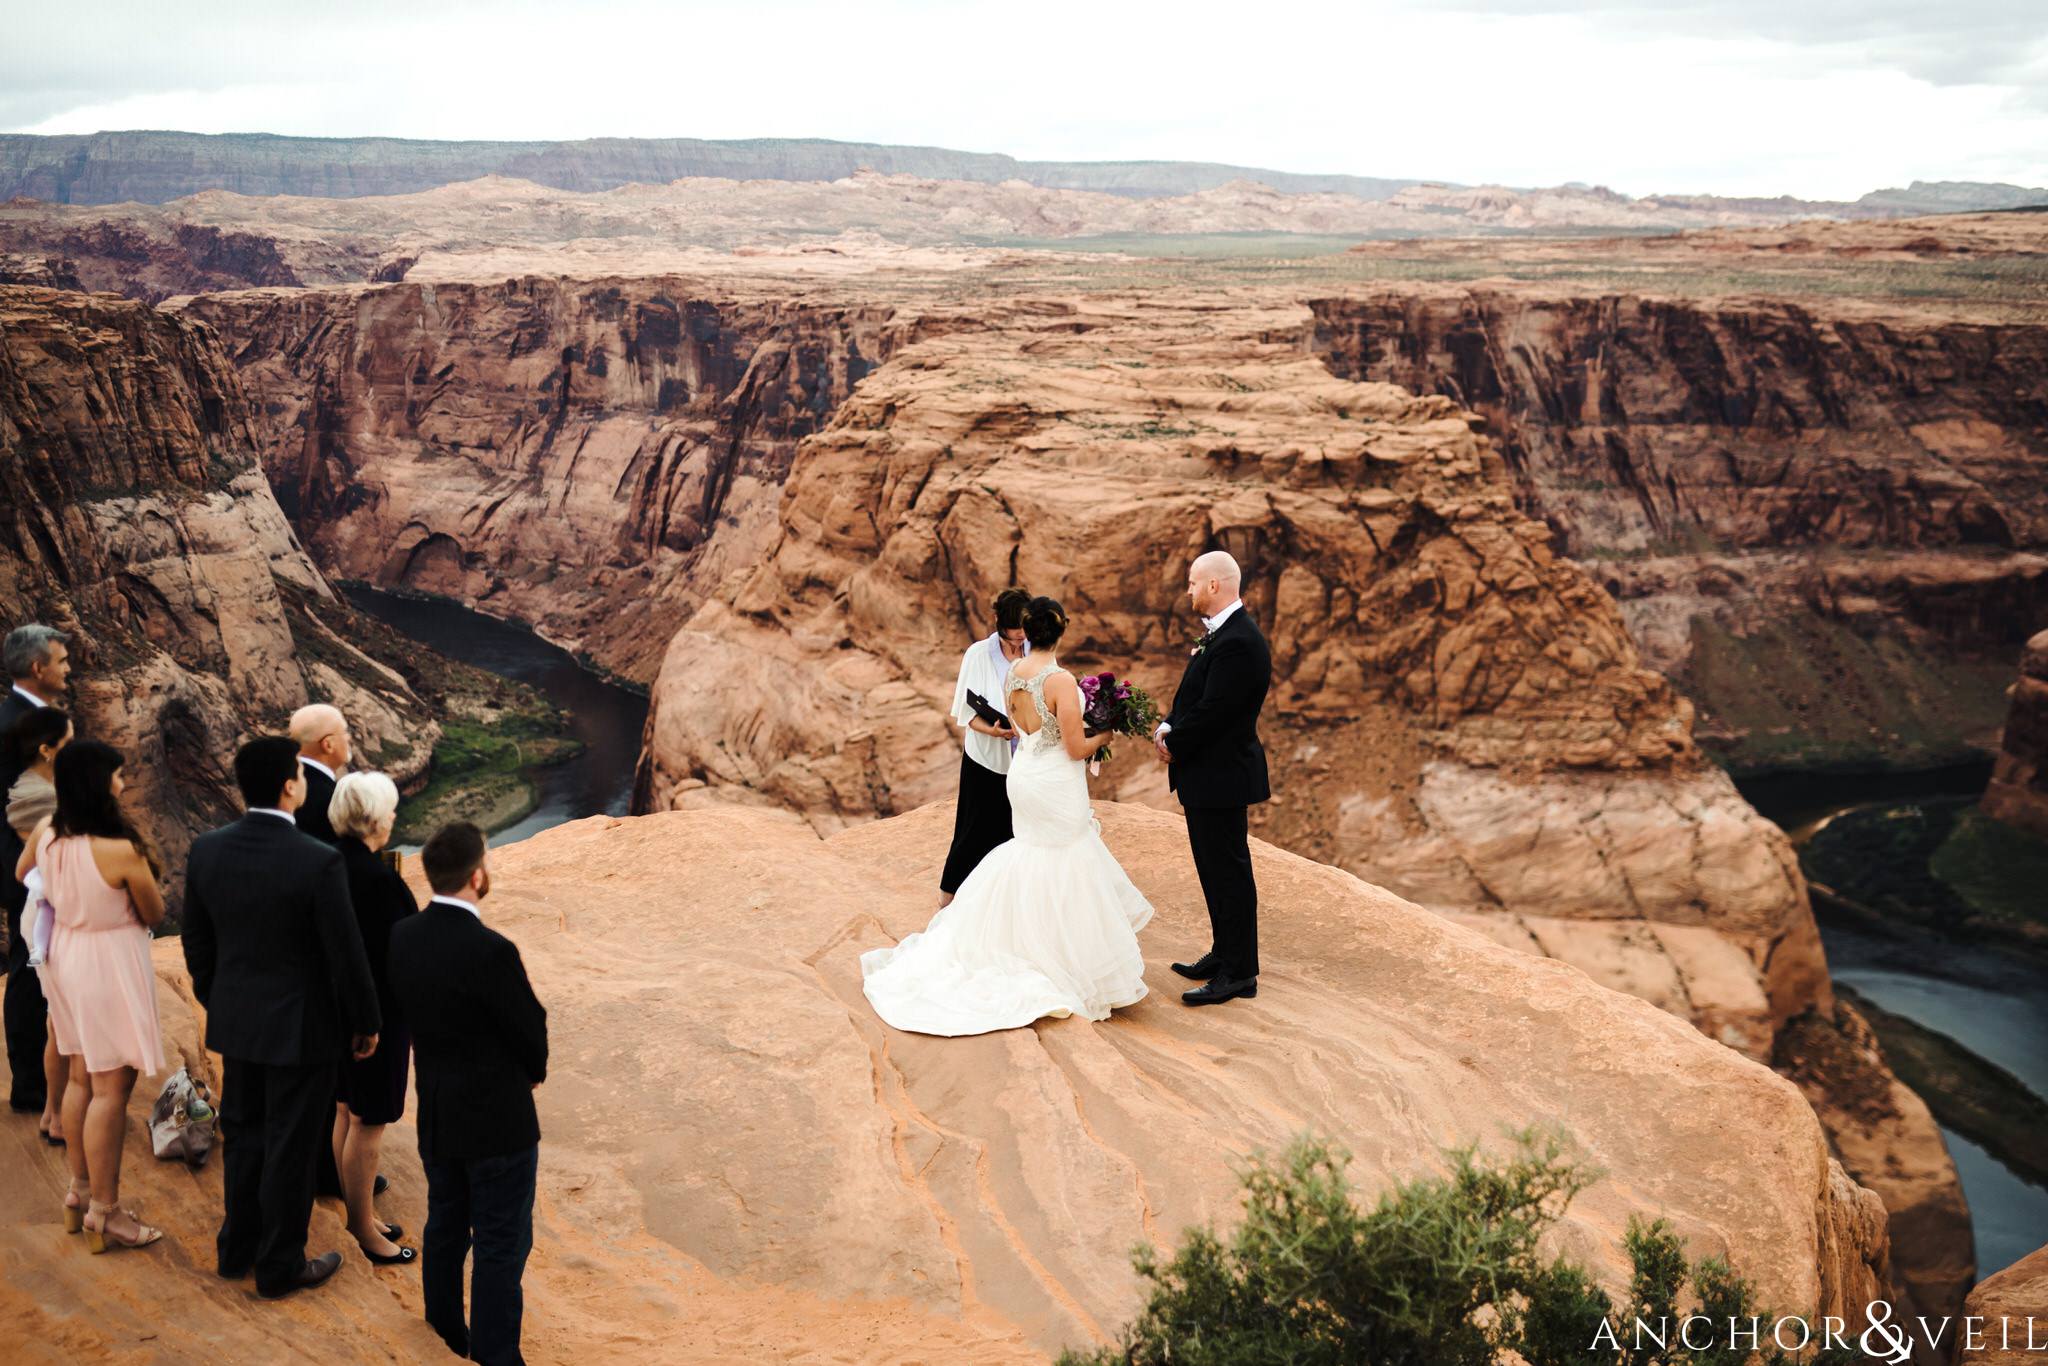 standing during the ceremony during their Horseshoe Bend Elopement Wedding